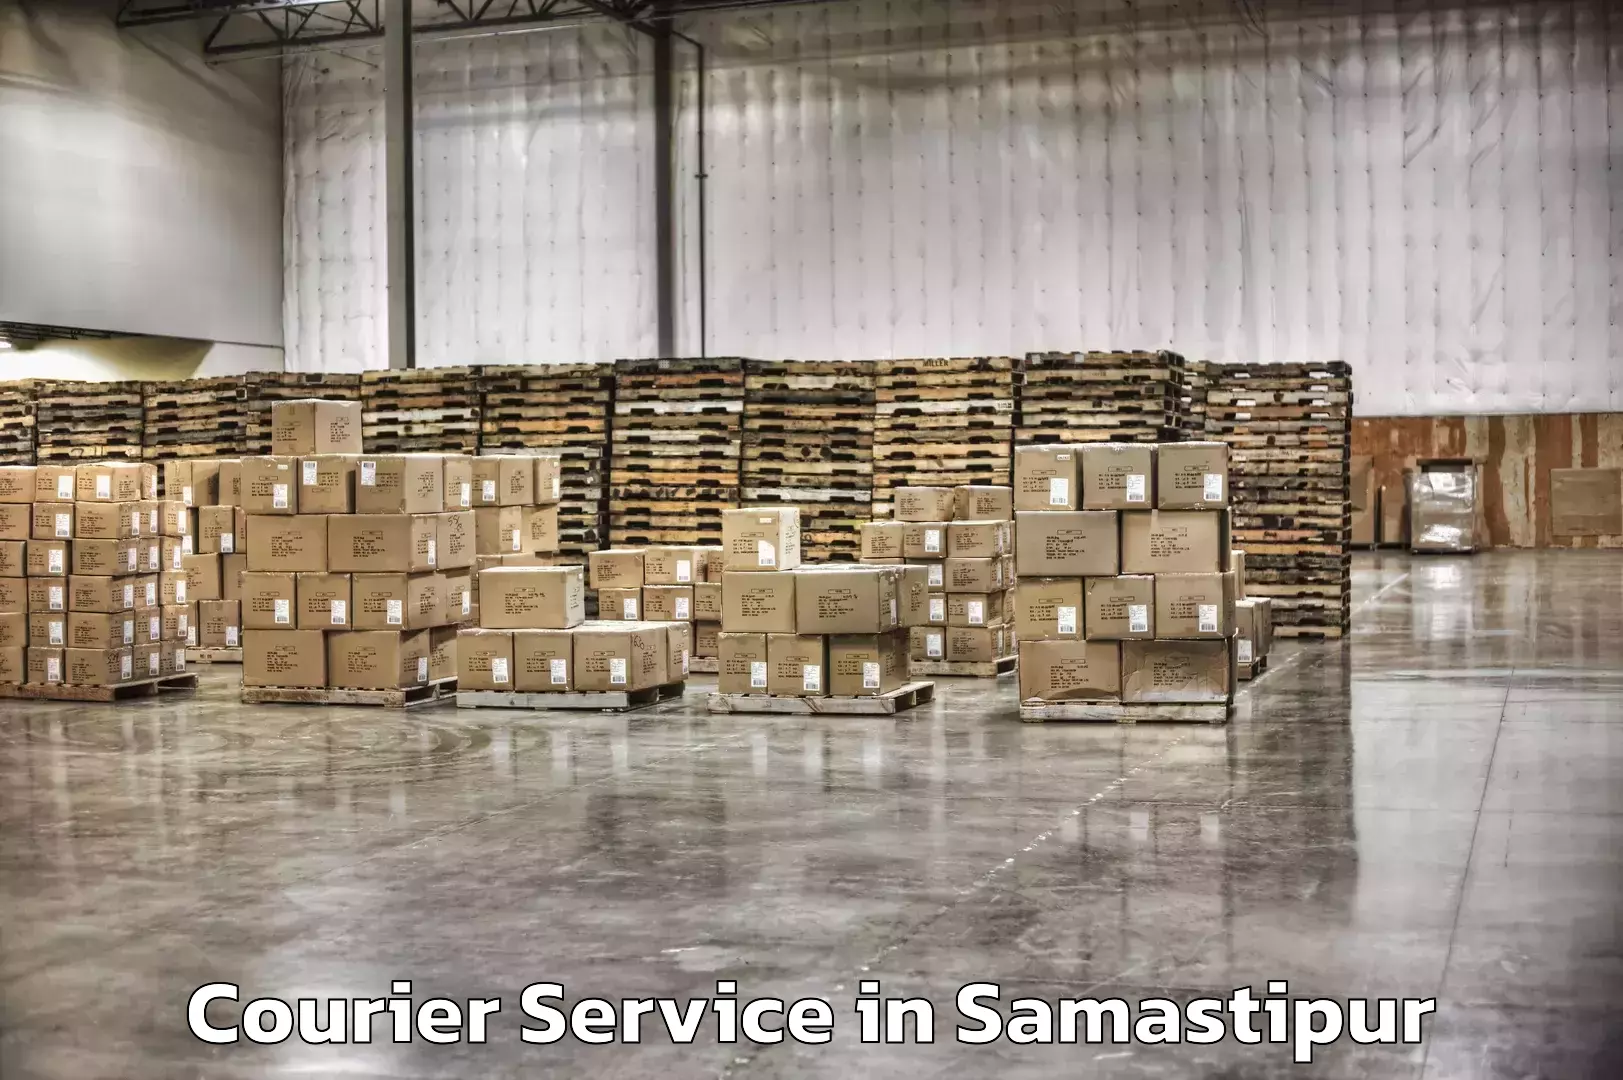 Advanced tracking systems in Samastipur